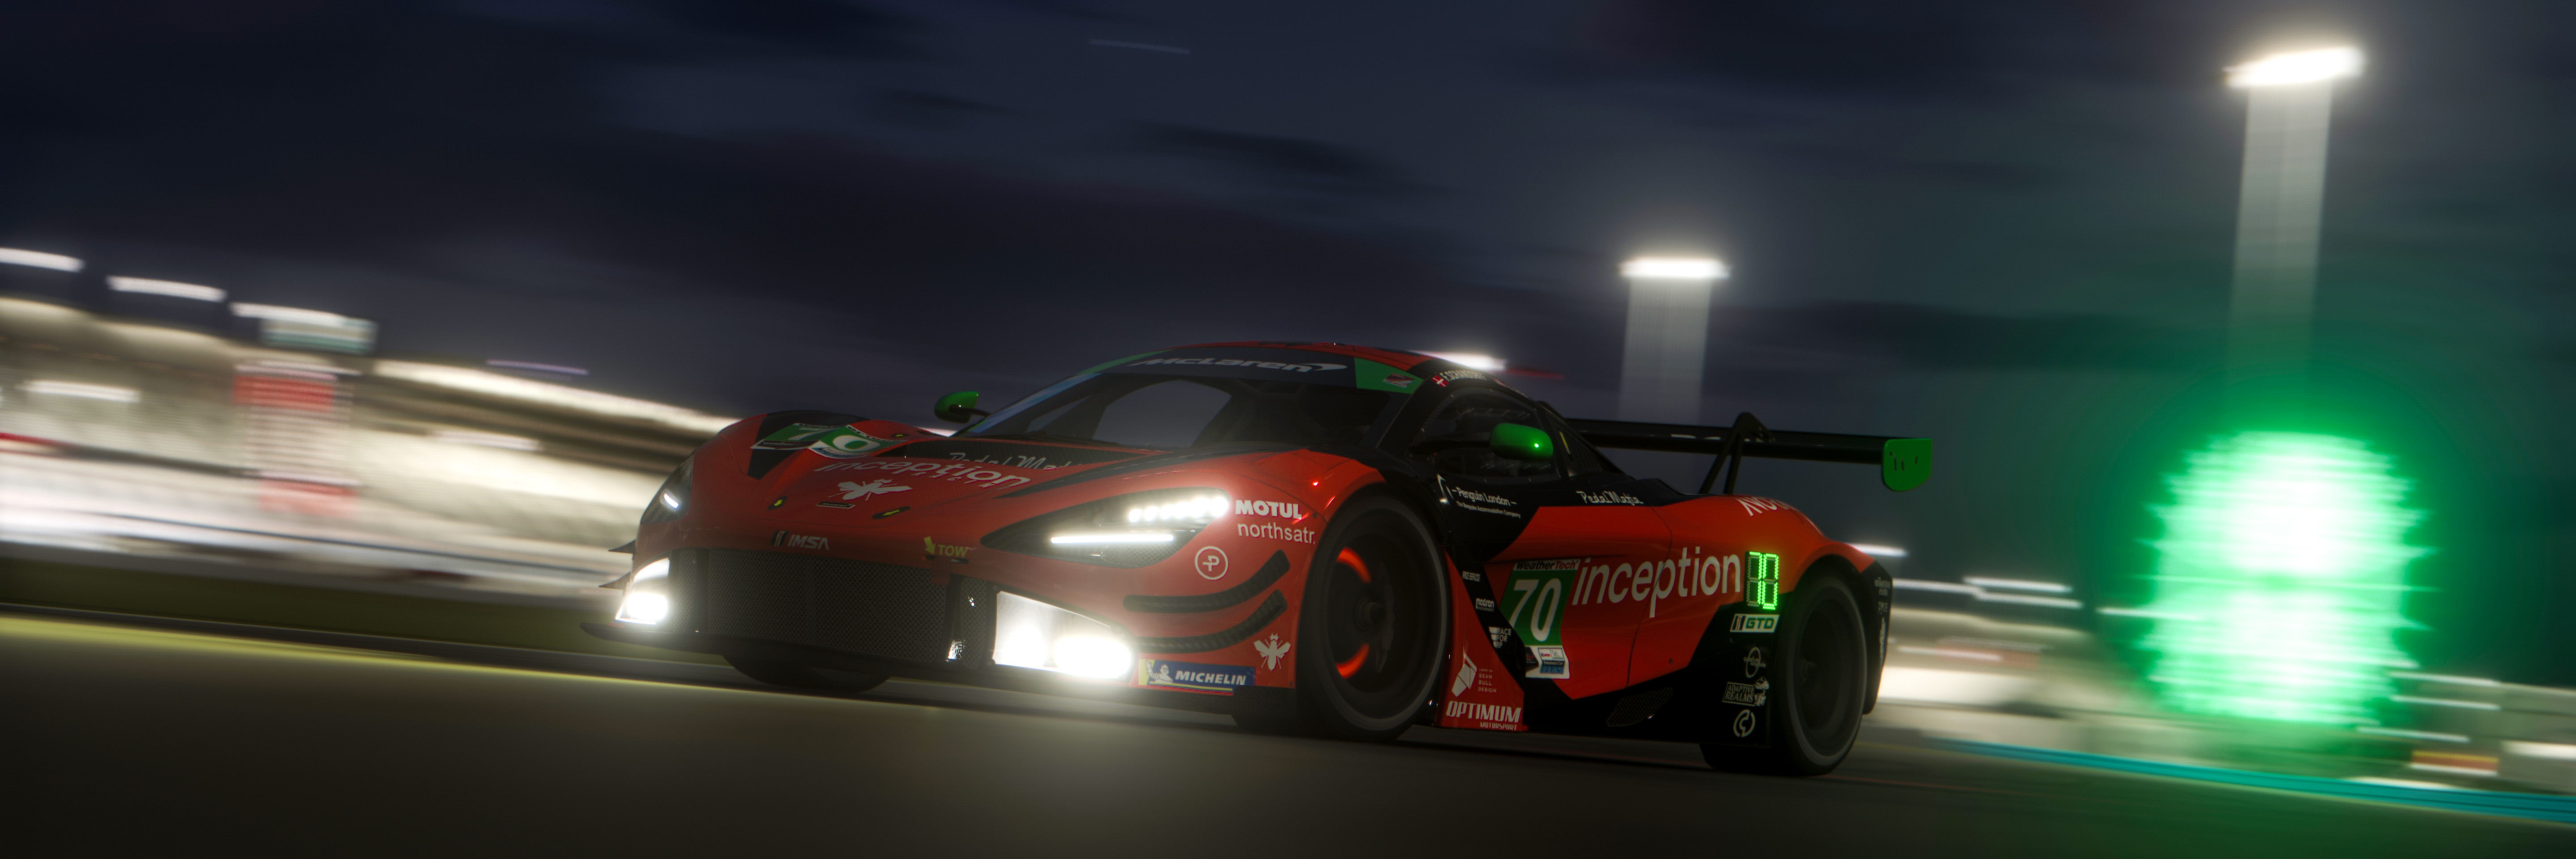 General 5760x1920 car PC gaming Assetto Corsa